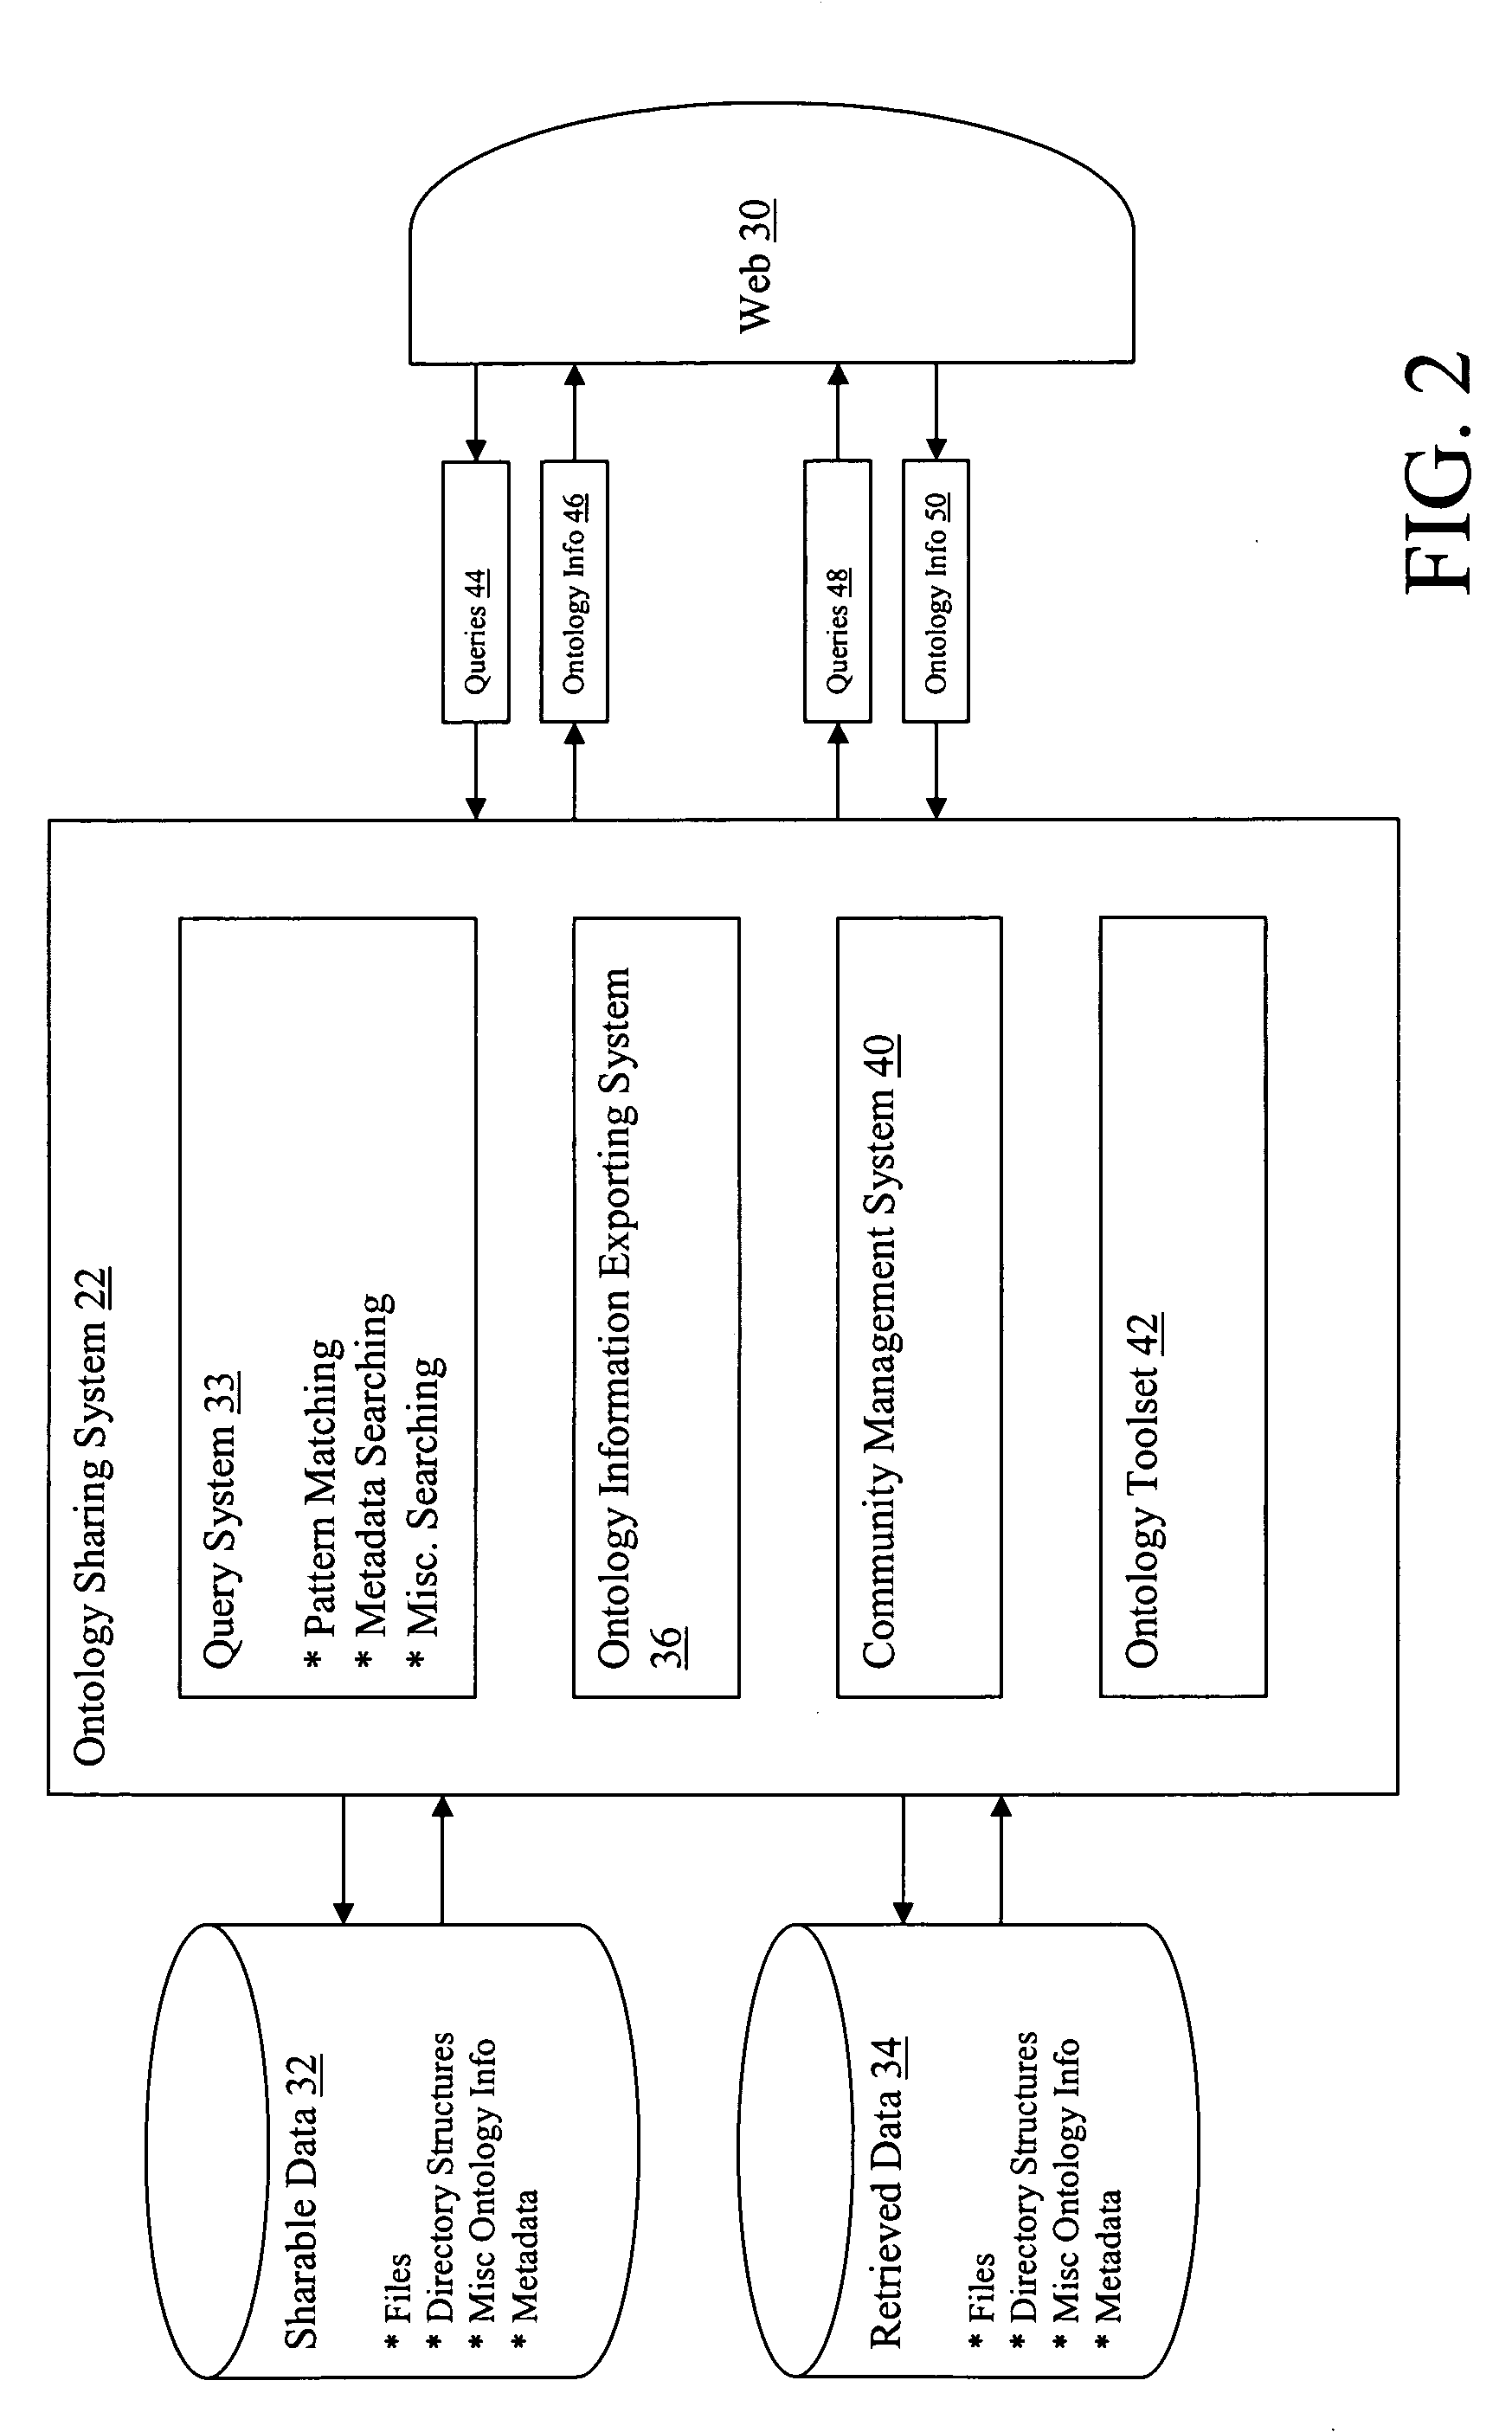 System for sharing ontology information in a peer-to-peer network